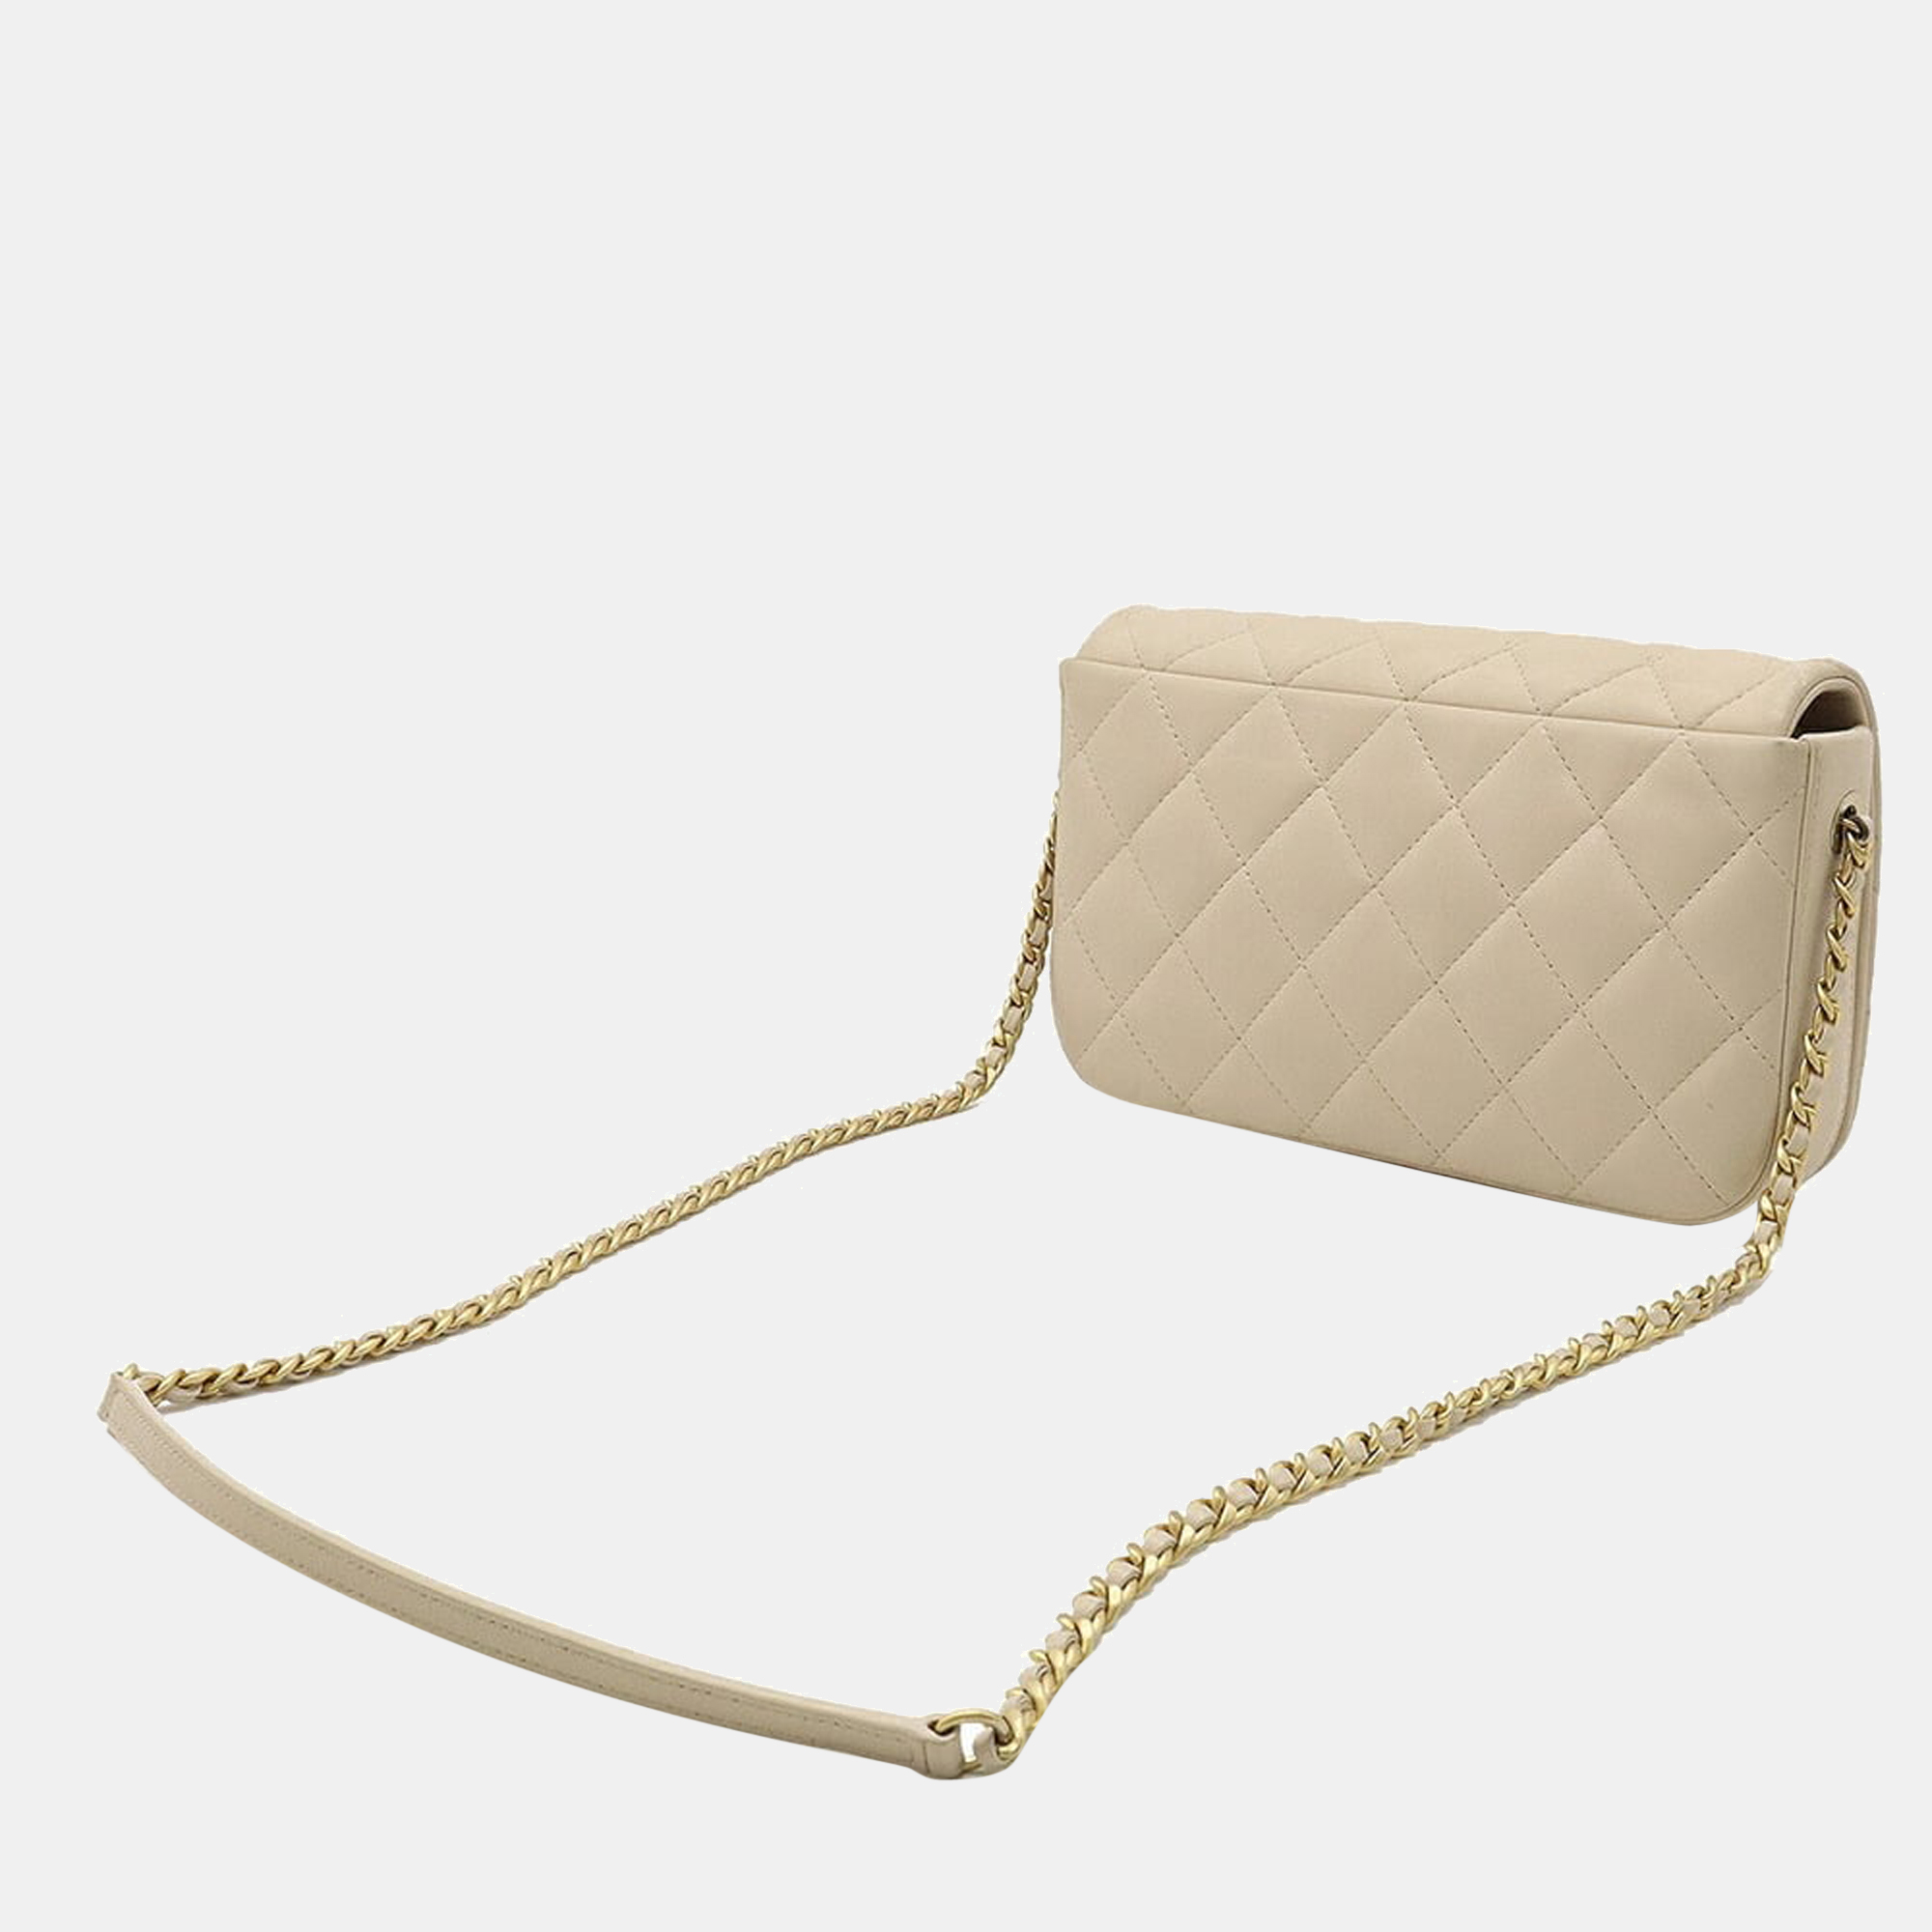 

Chanel Cream Quilted Leather Fashion Therapy full Flap Bag